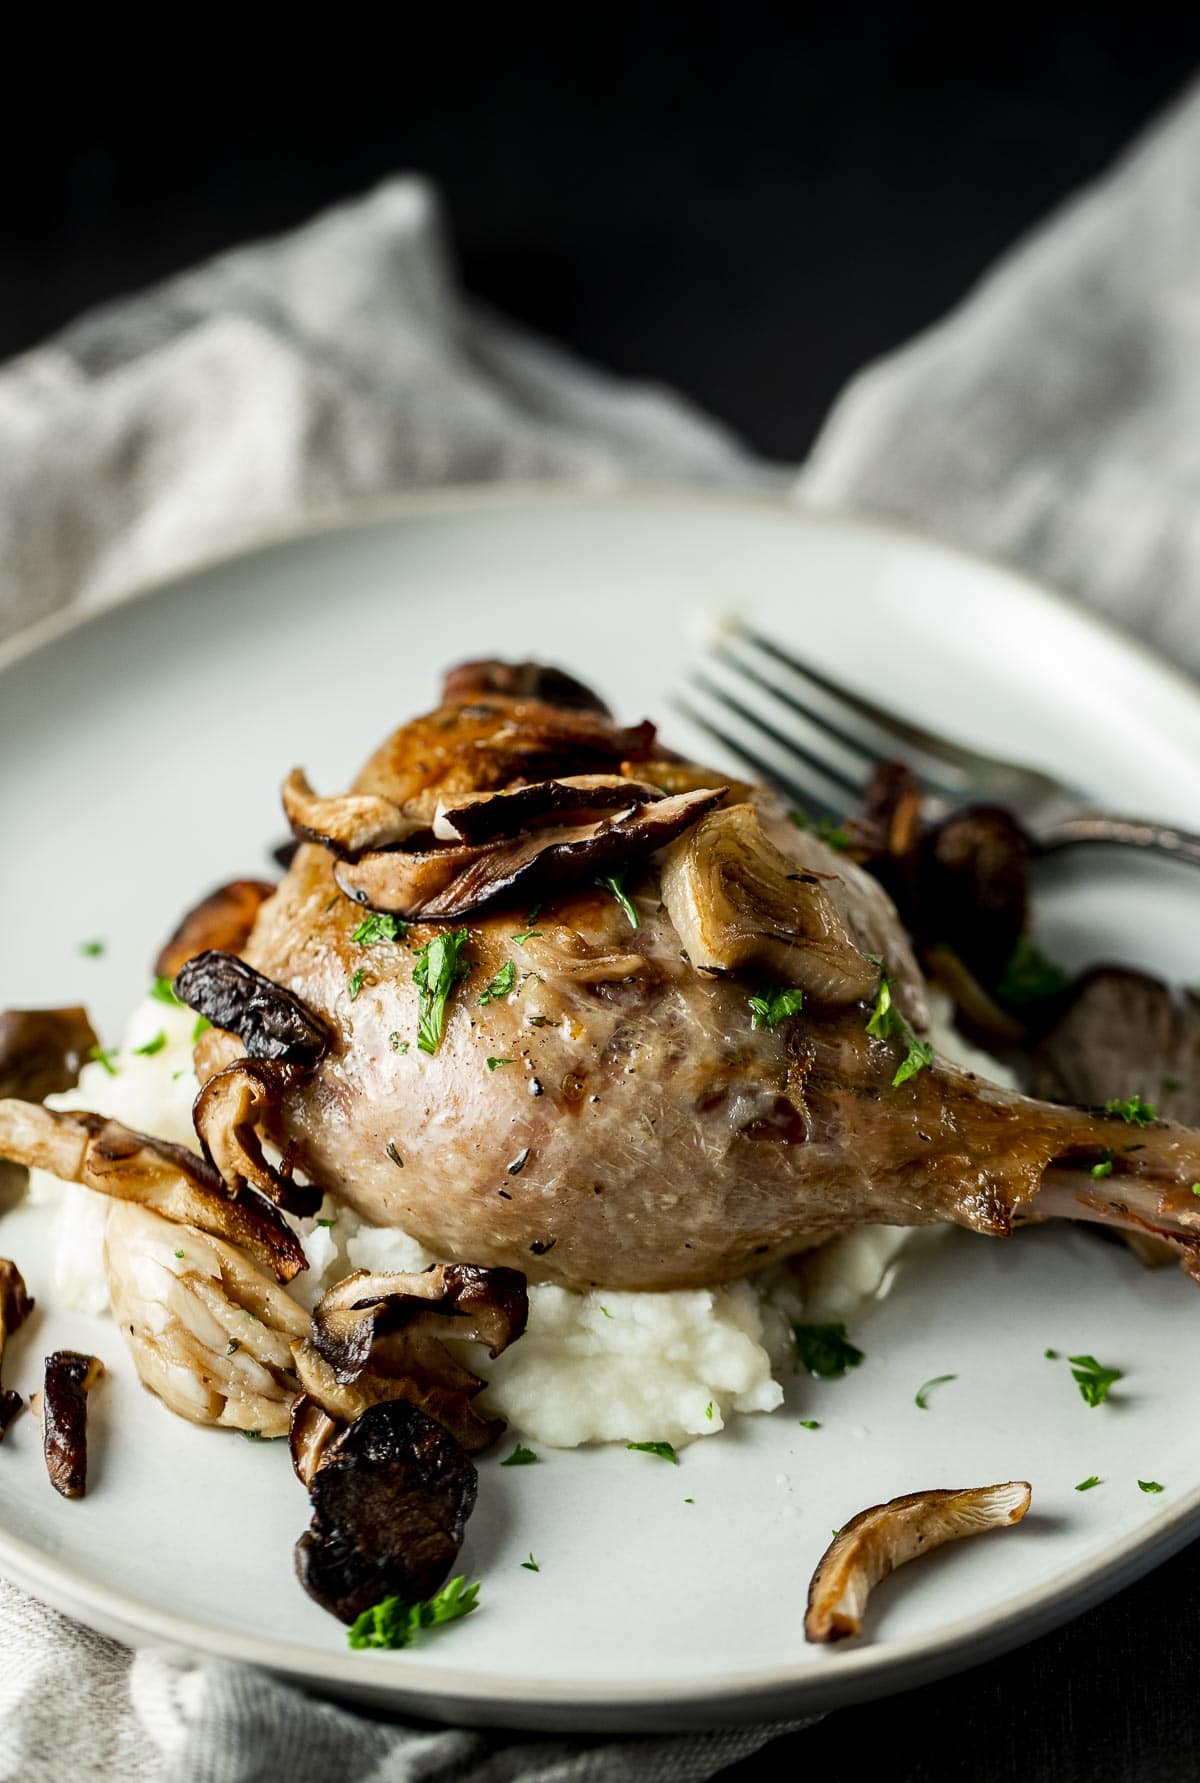 Duck leg served with mushrooms over mashed potatoes.